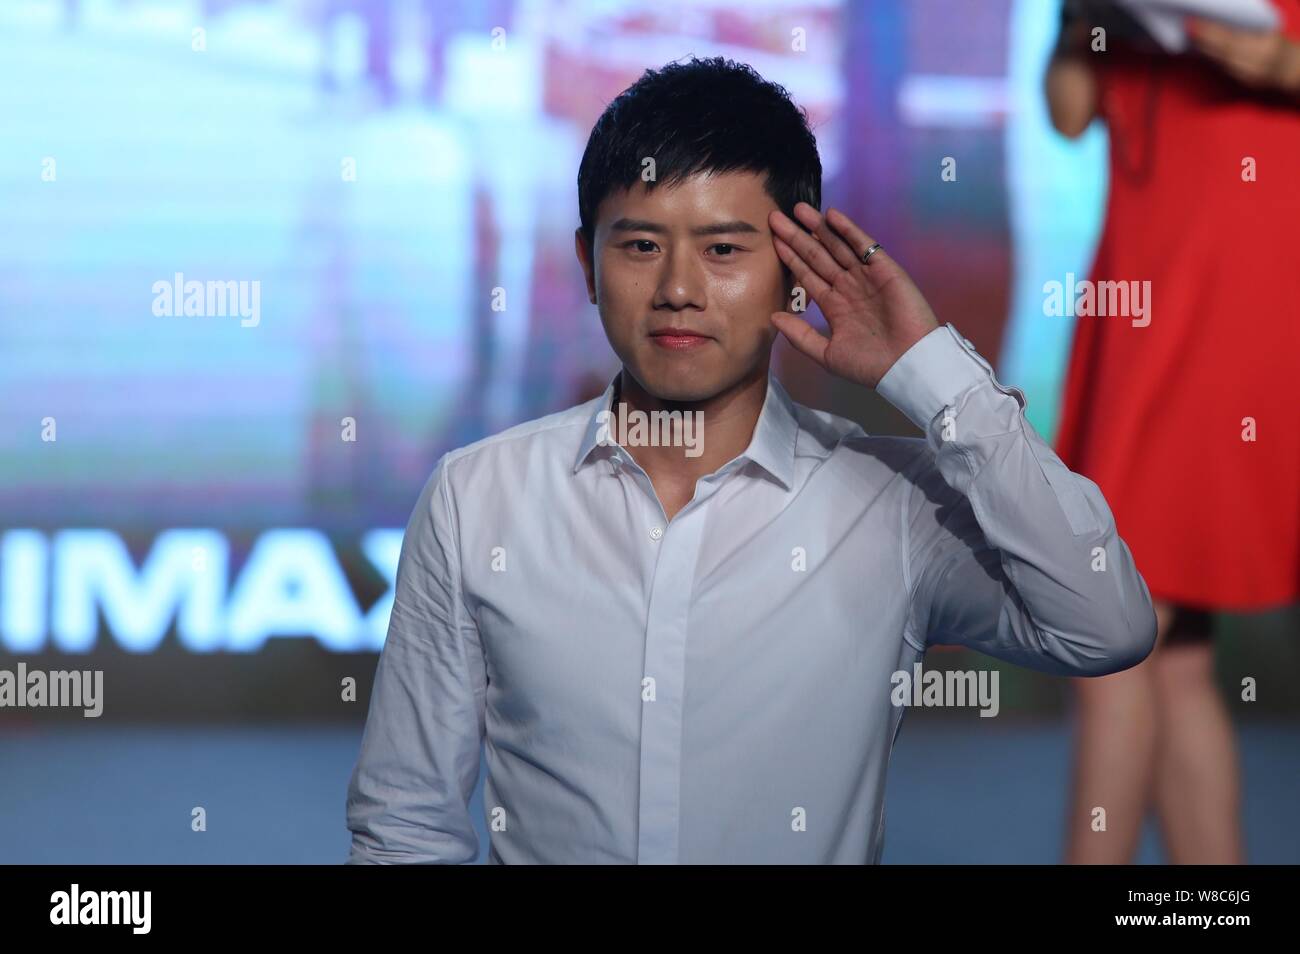 Chinese singer and actor Zhang Jie attends a press conference for the premiere of his new movie 'Monk Comes Down the Mountain' in Beijing, China, 2 Ju Stock Photo